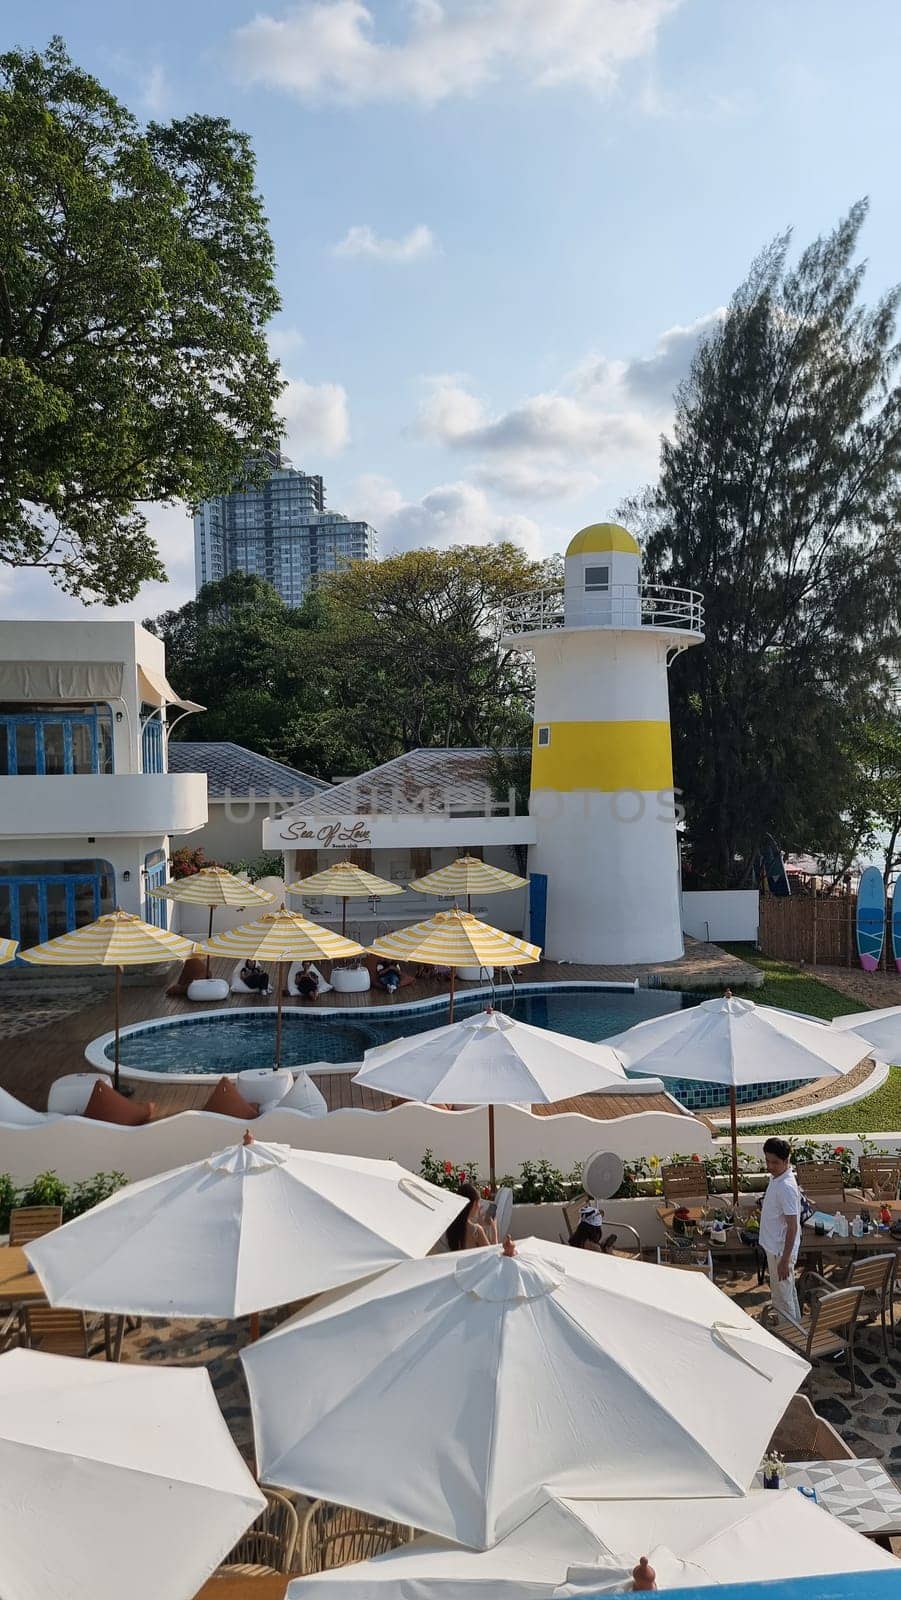 Colorful umbrellas providing shade next to a serene swimming pool, creating a vibrant and relaxing atmosphere for leisure and relaxation by fokkebok